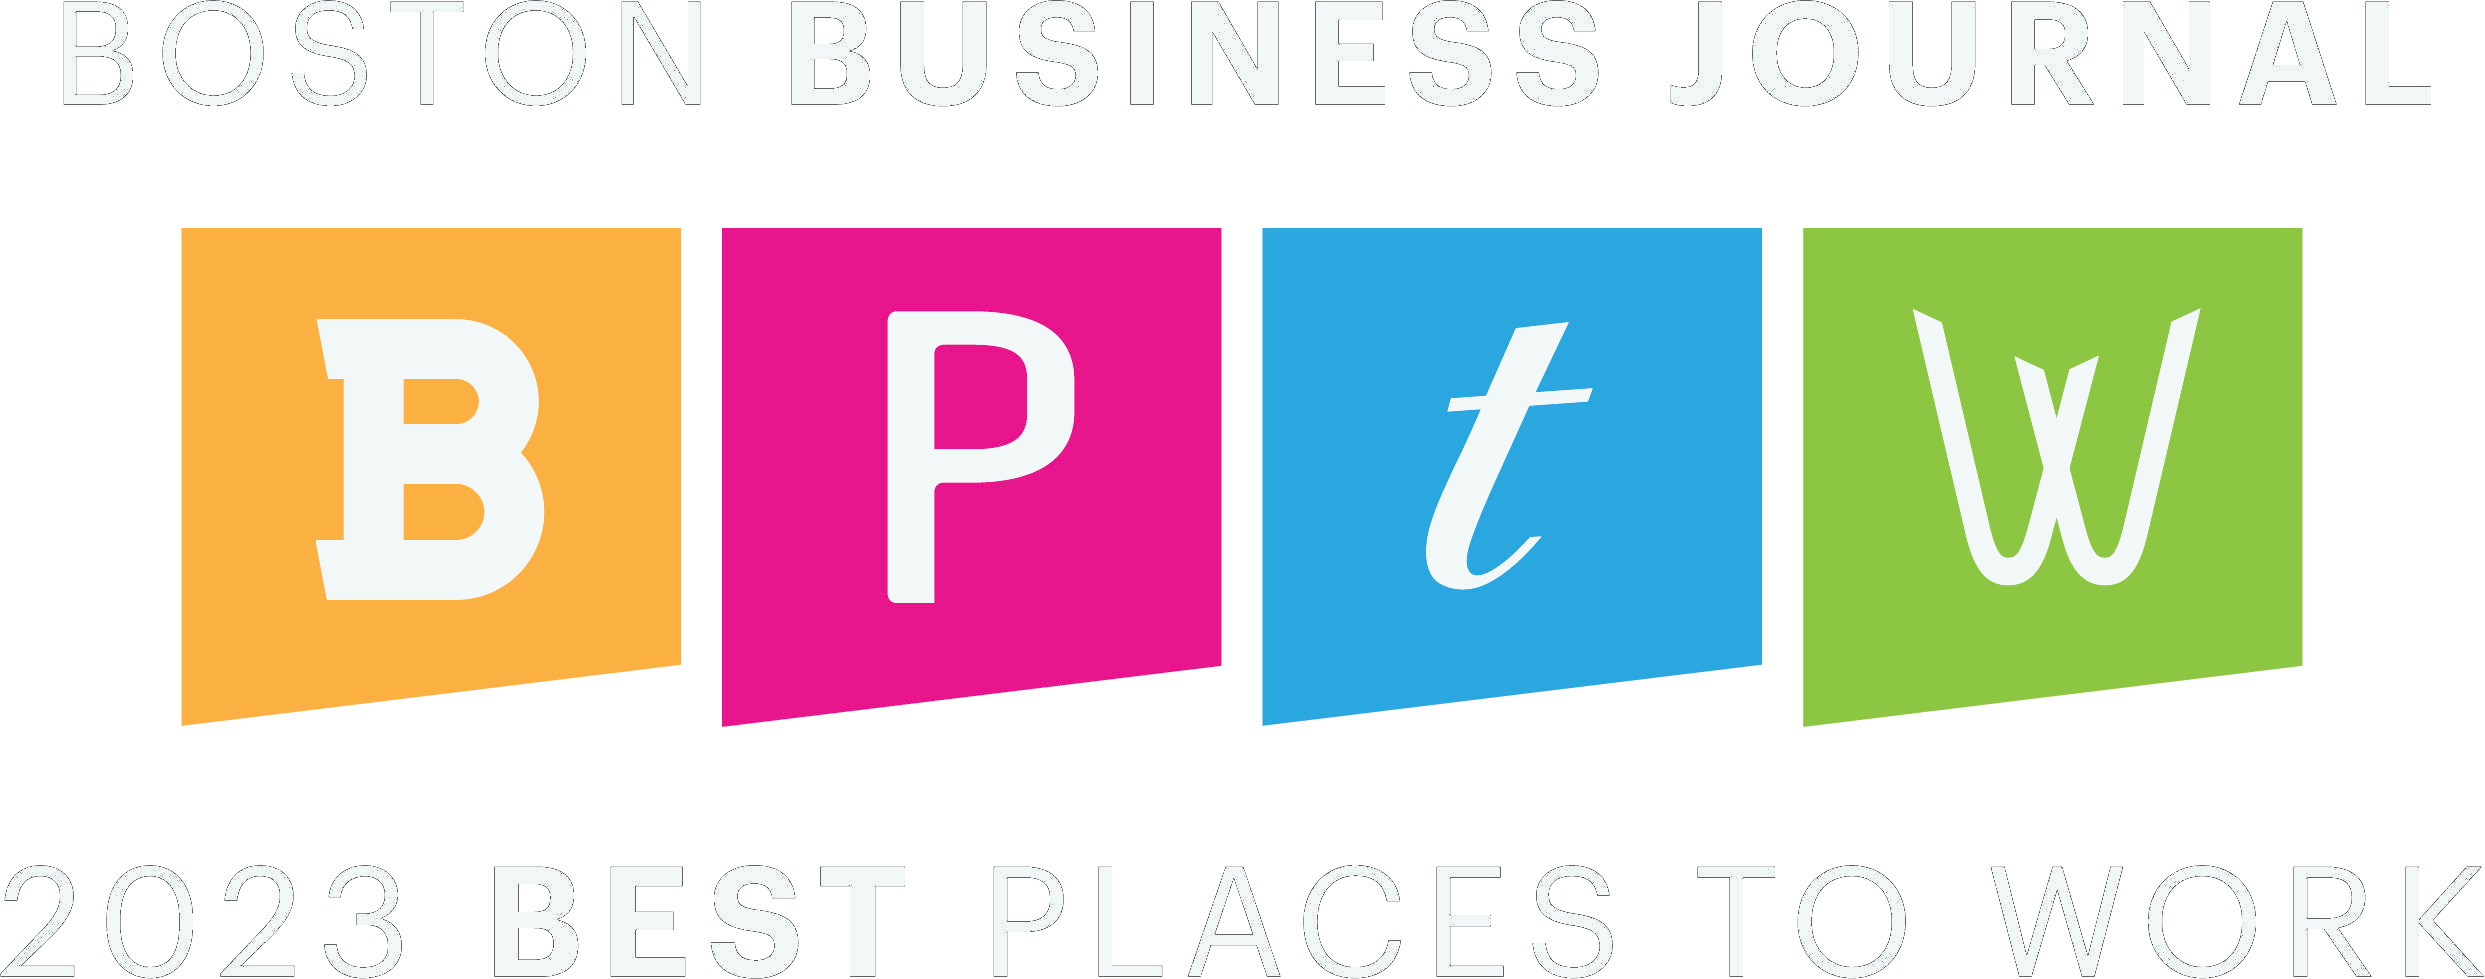 Boston Business Journal "Best Places to Work" Logo